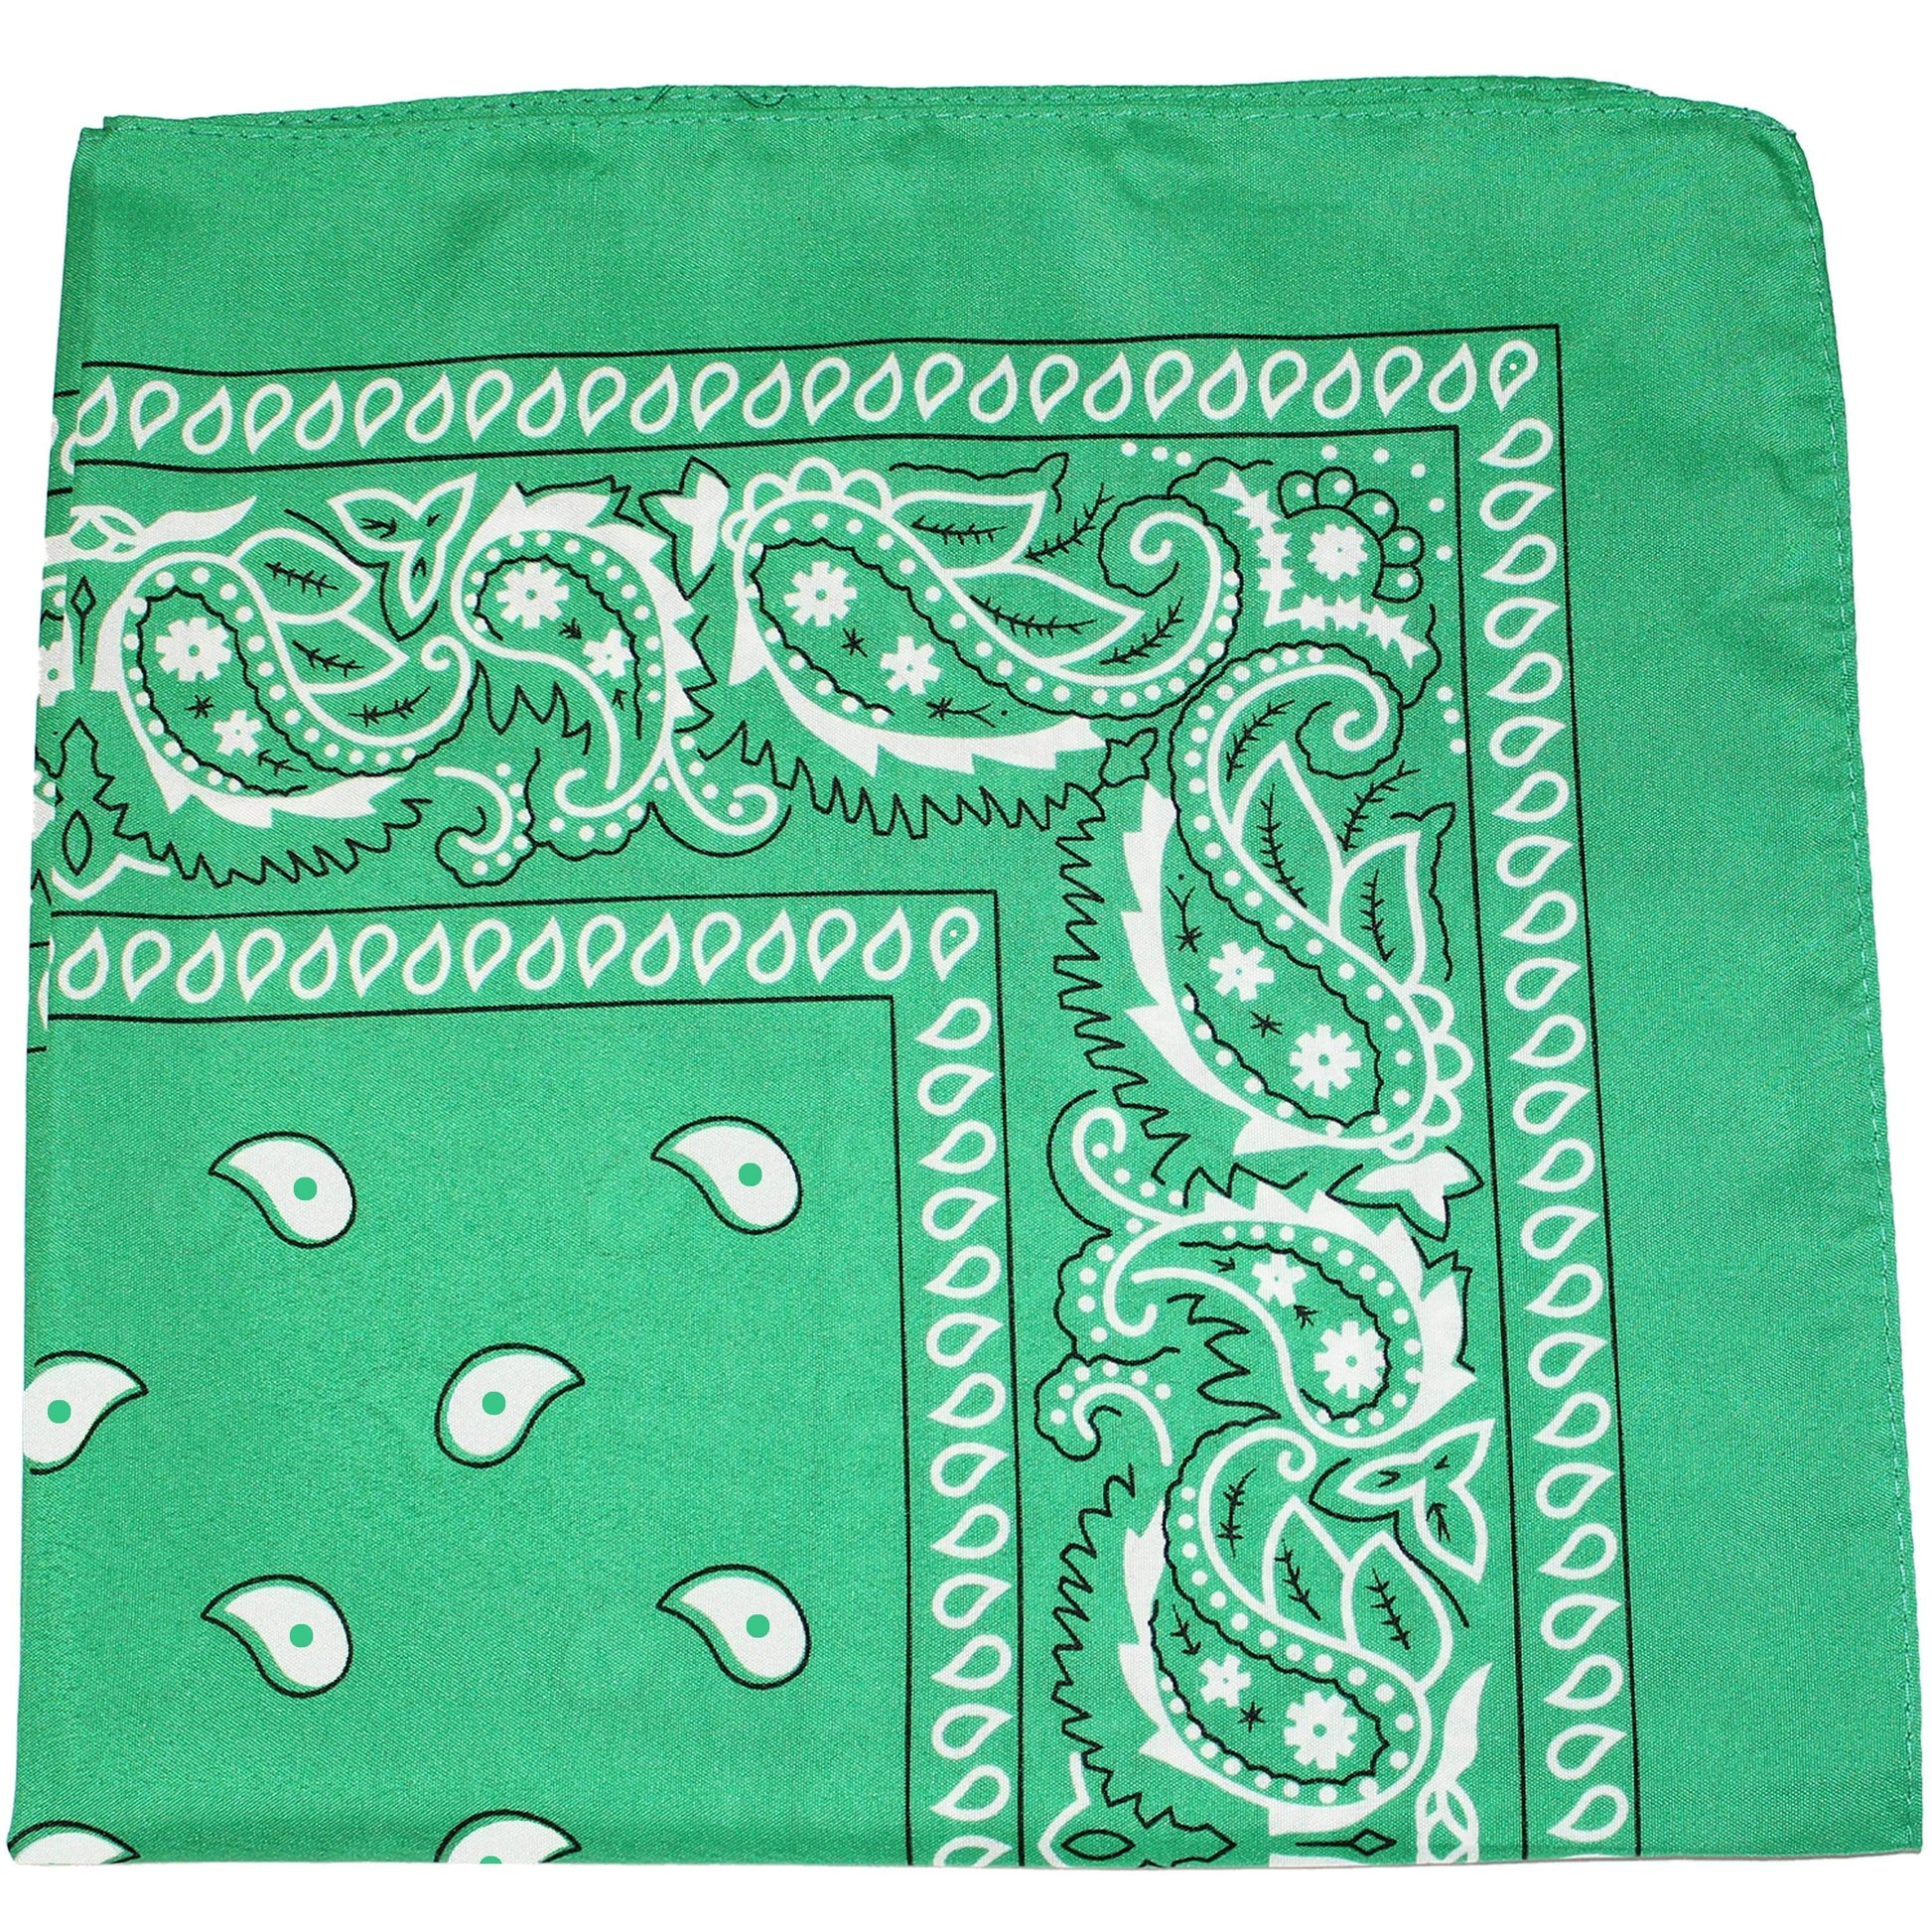 Pack of 10 Polyester 22 x 22 Inch Paisley Printed Bandanas